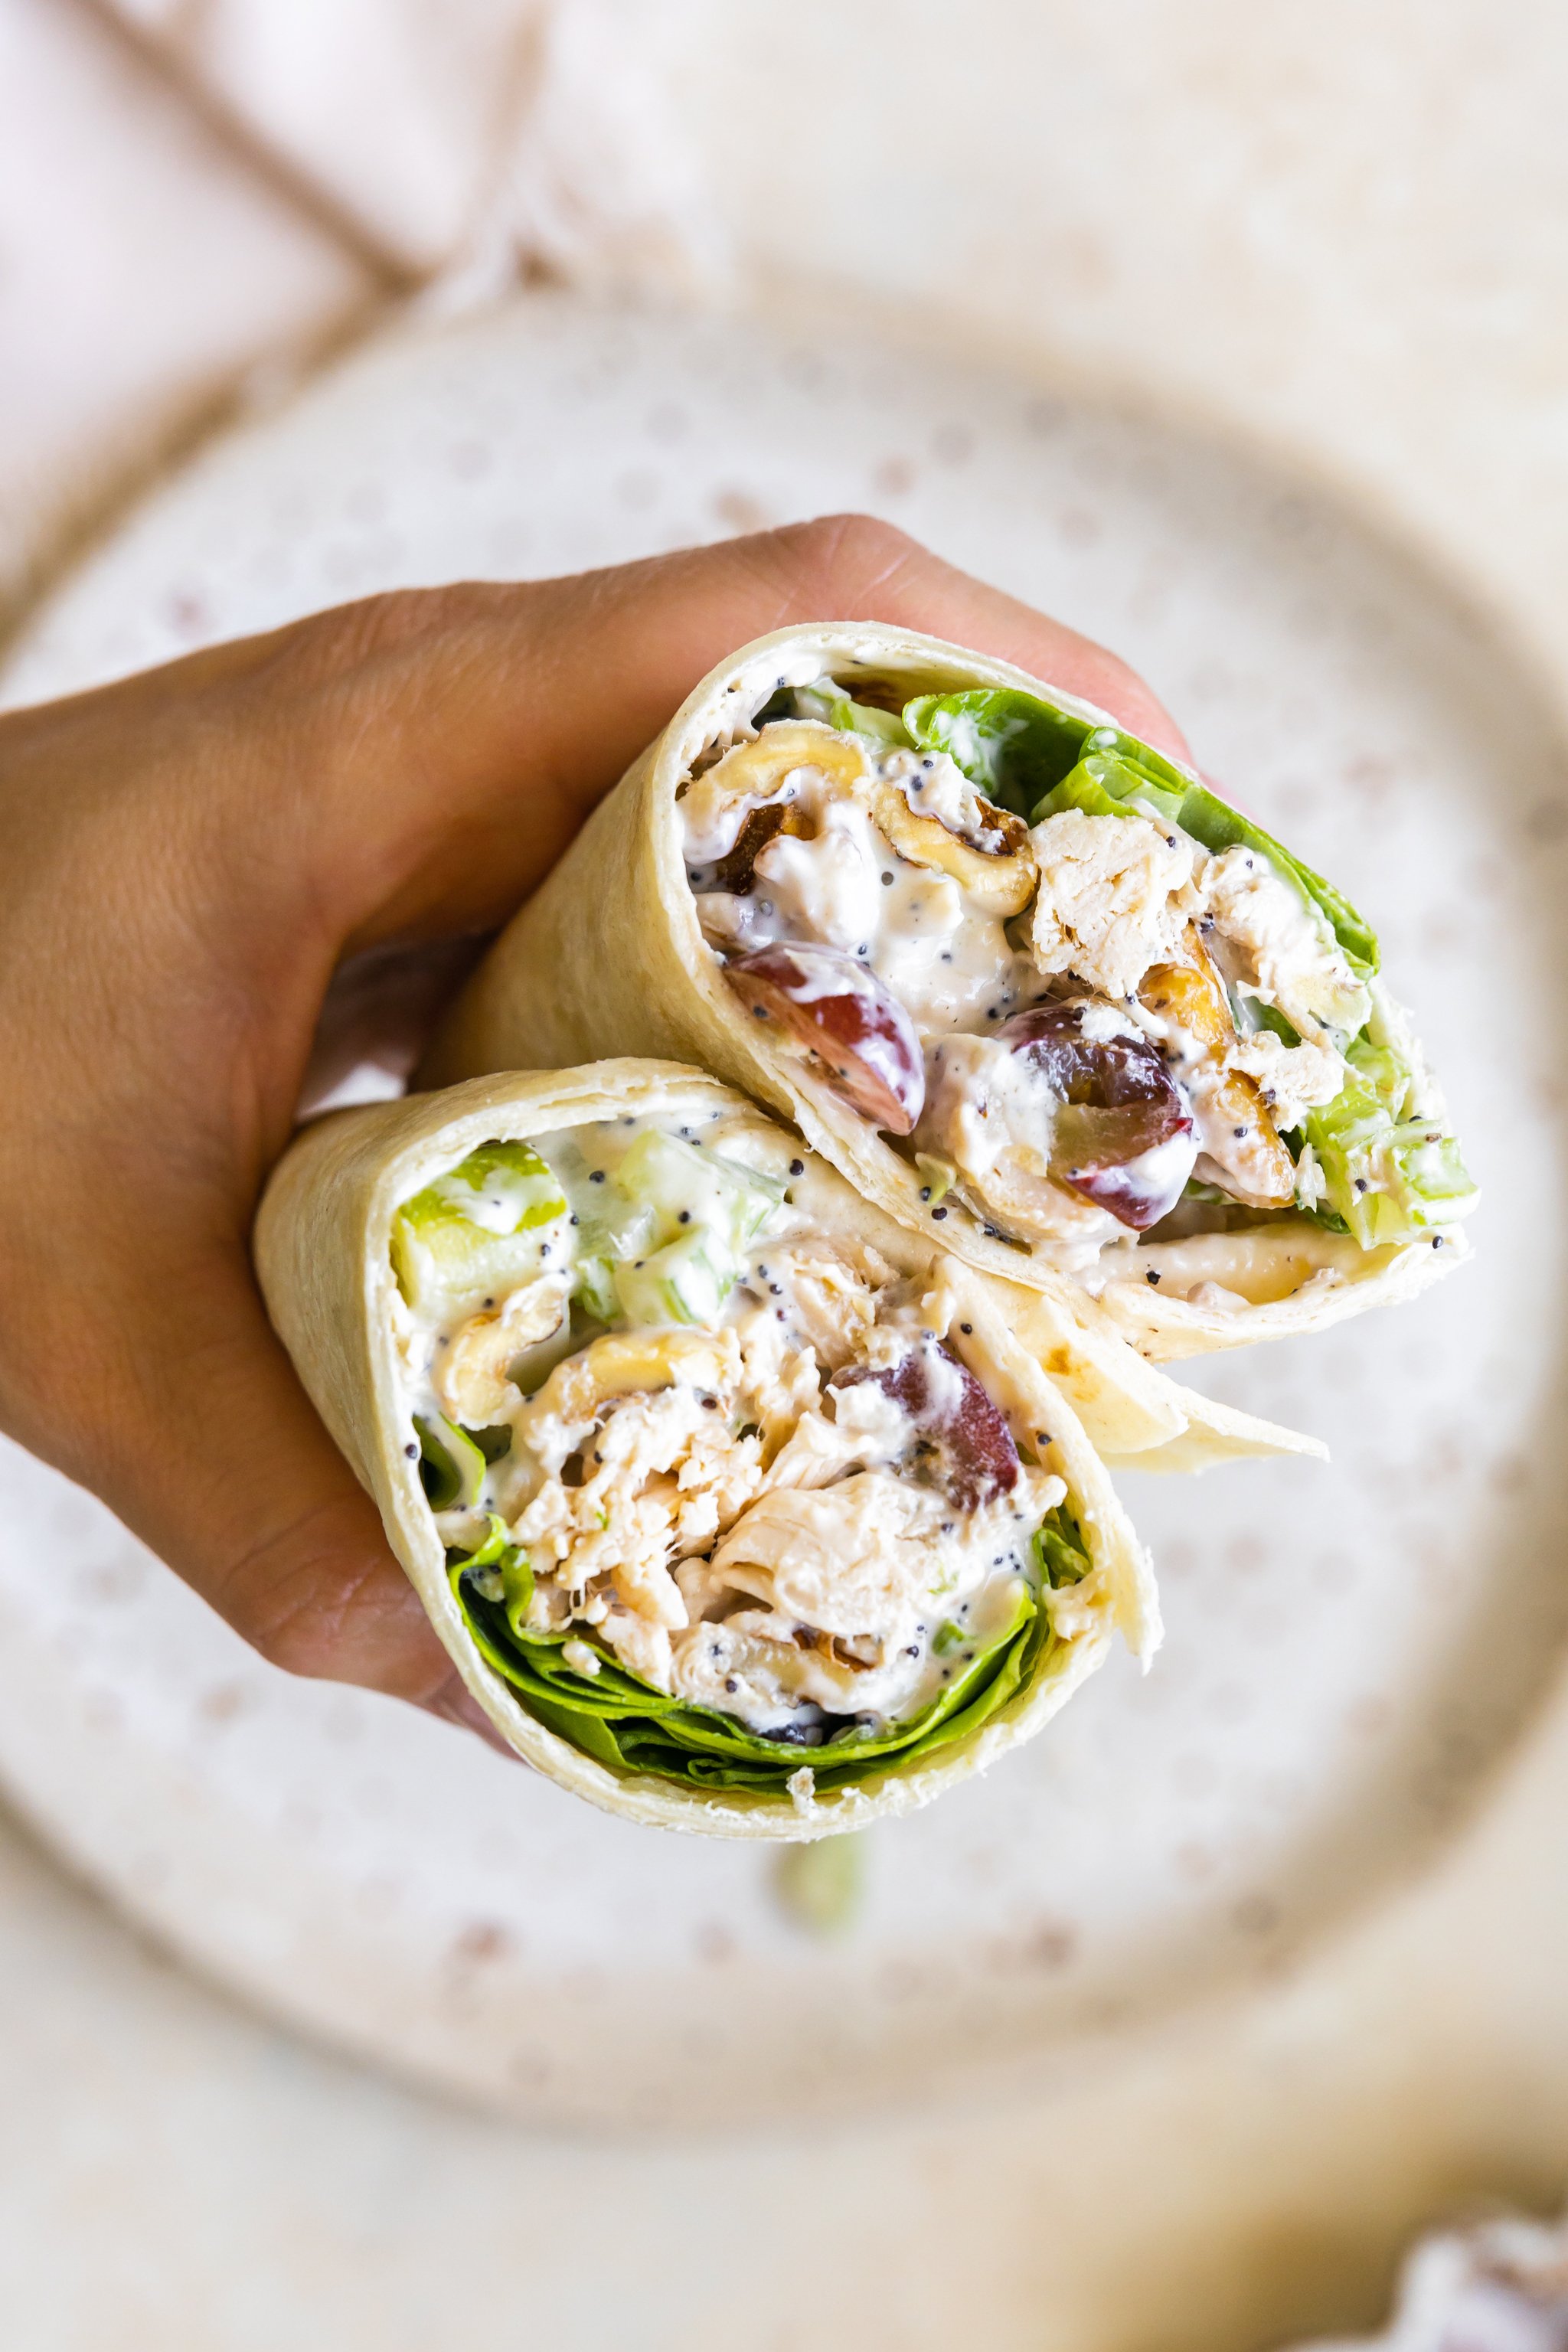 chicken salad wrapped in a tortilla.